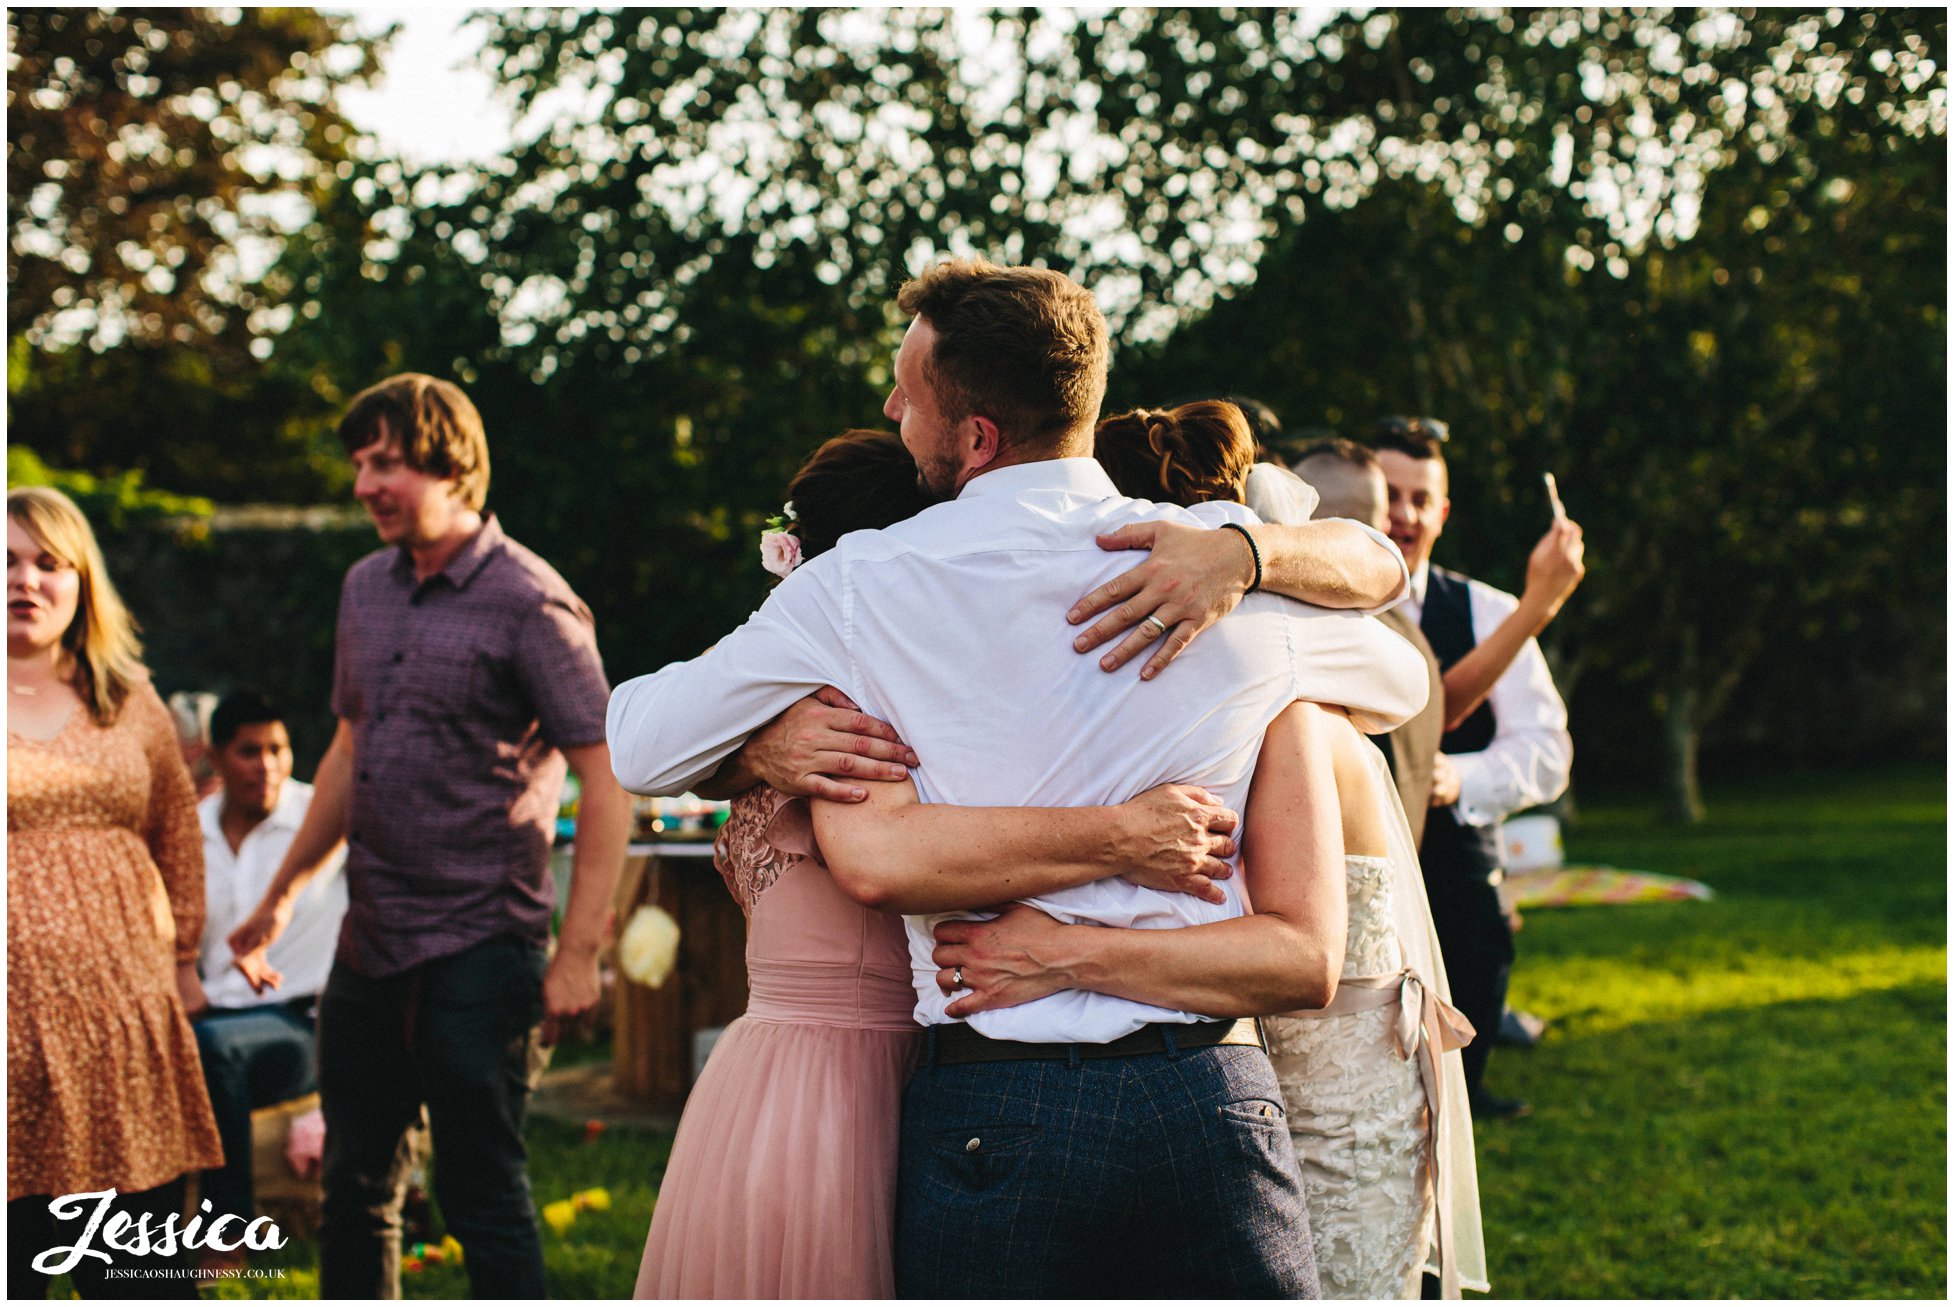 guests have group hug after the first dance ends